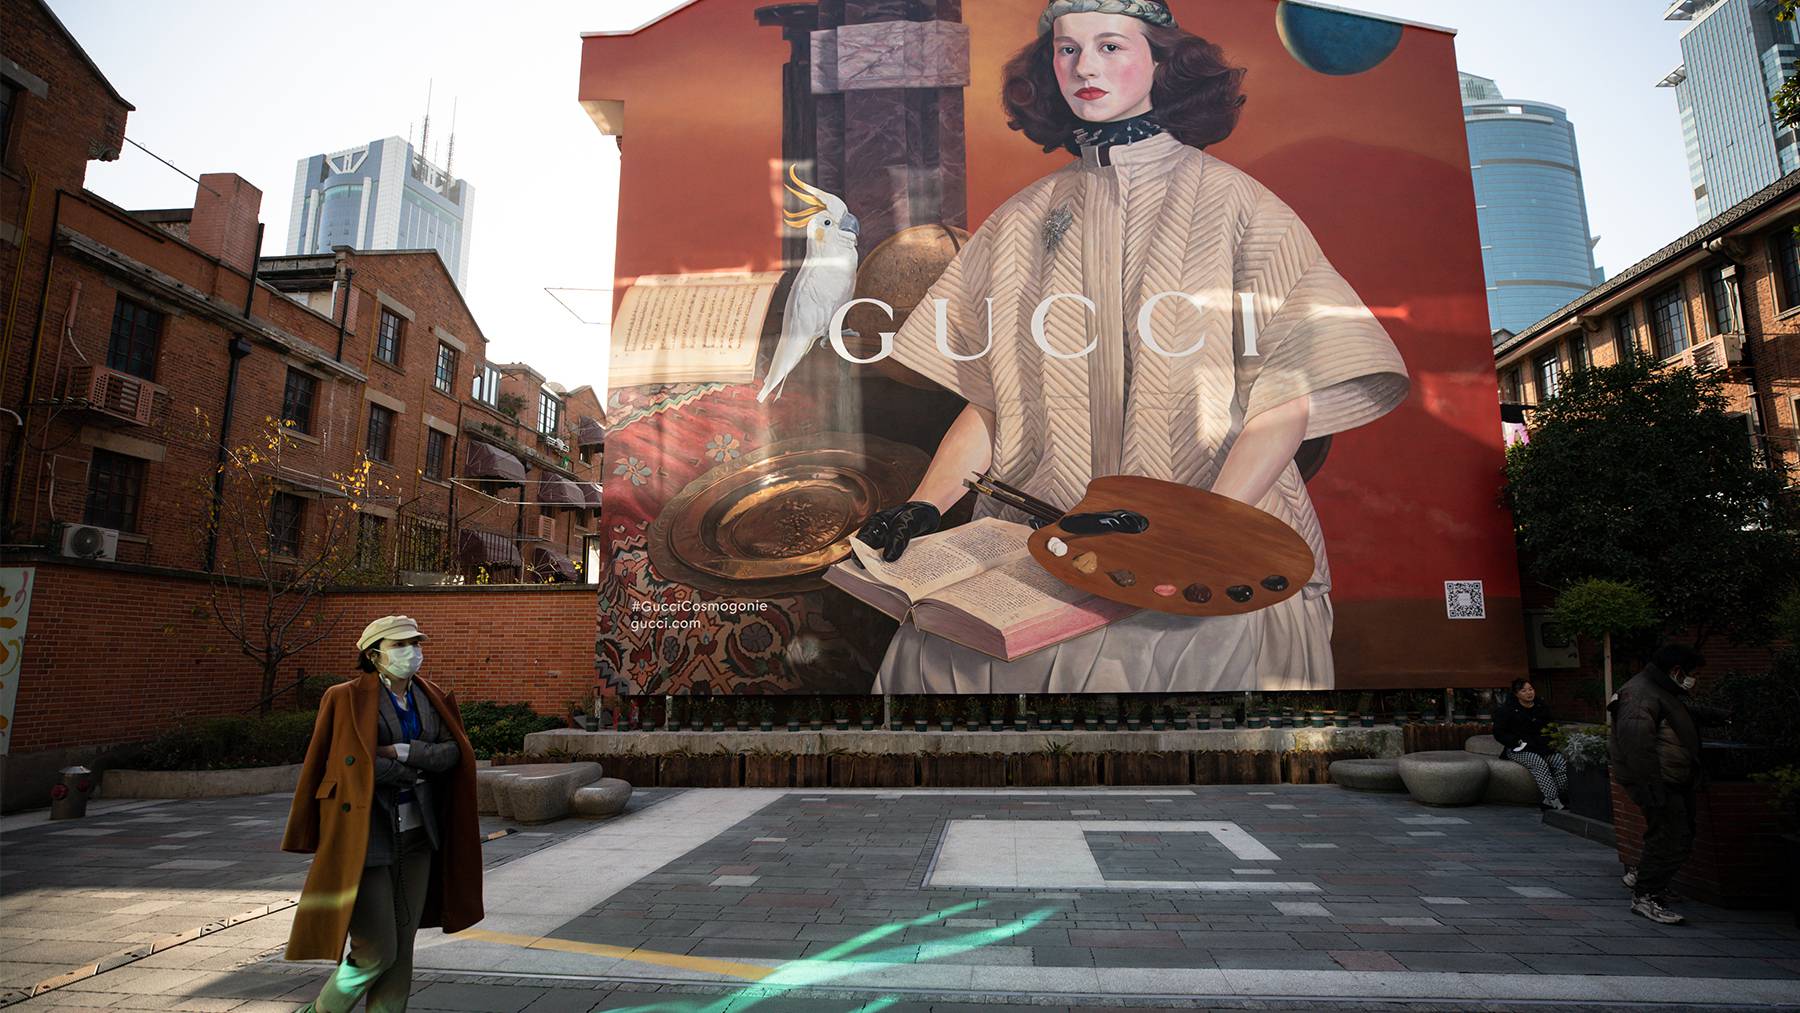 Gucci is looking to grow sales in China as the current wave of Covid cases subsides.